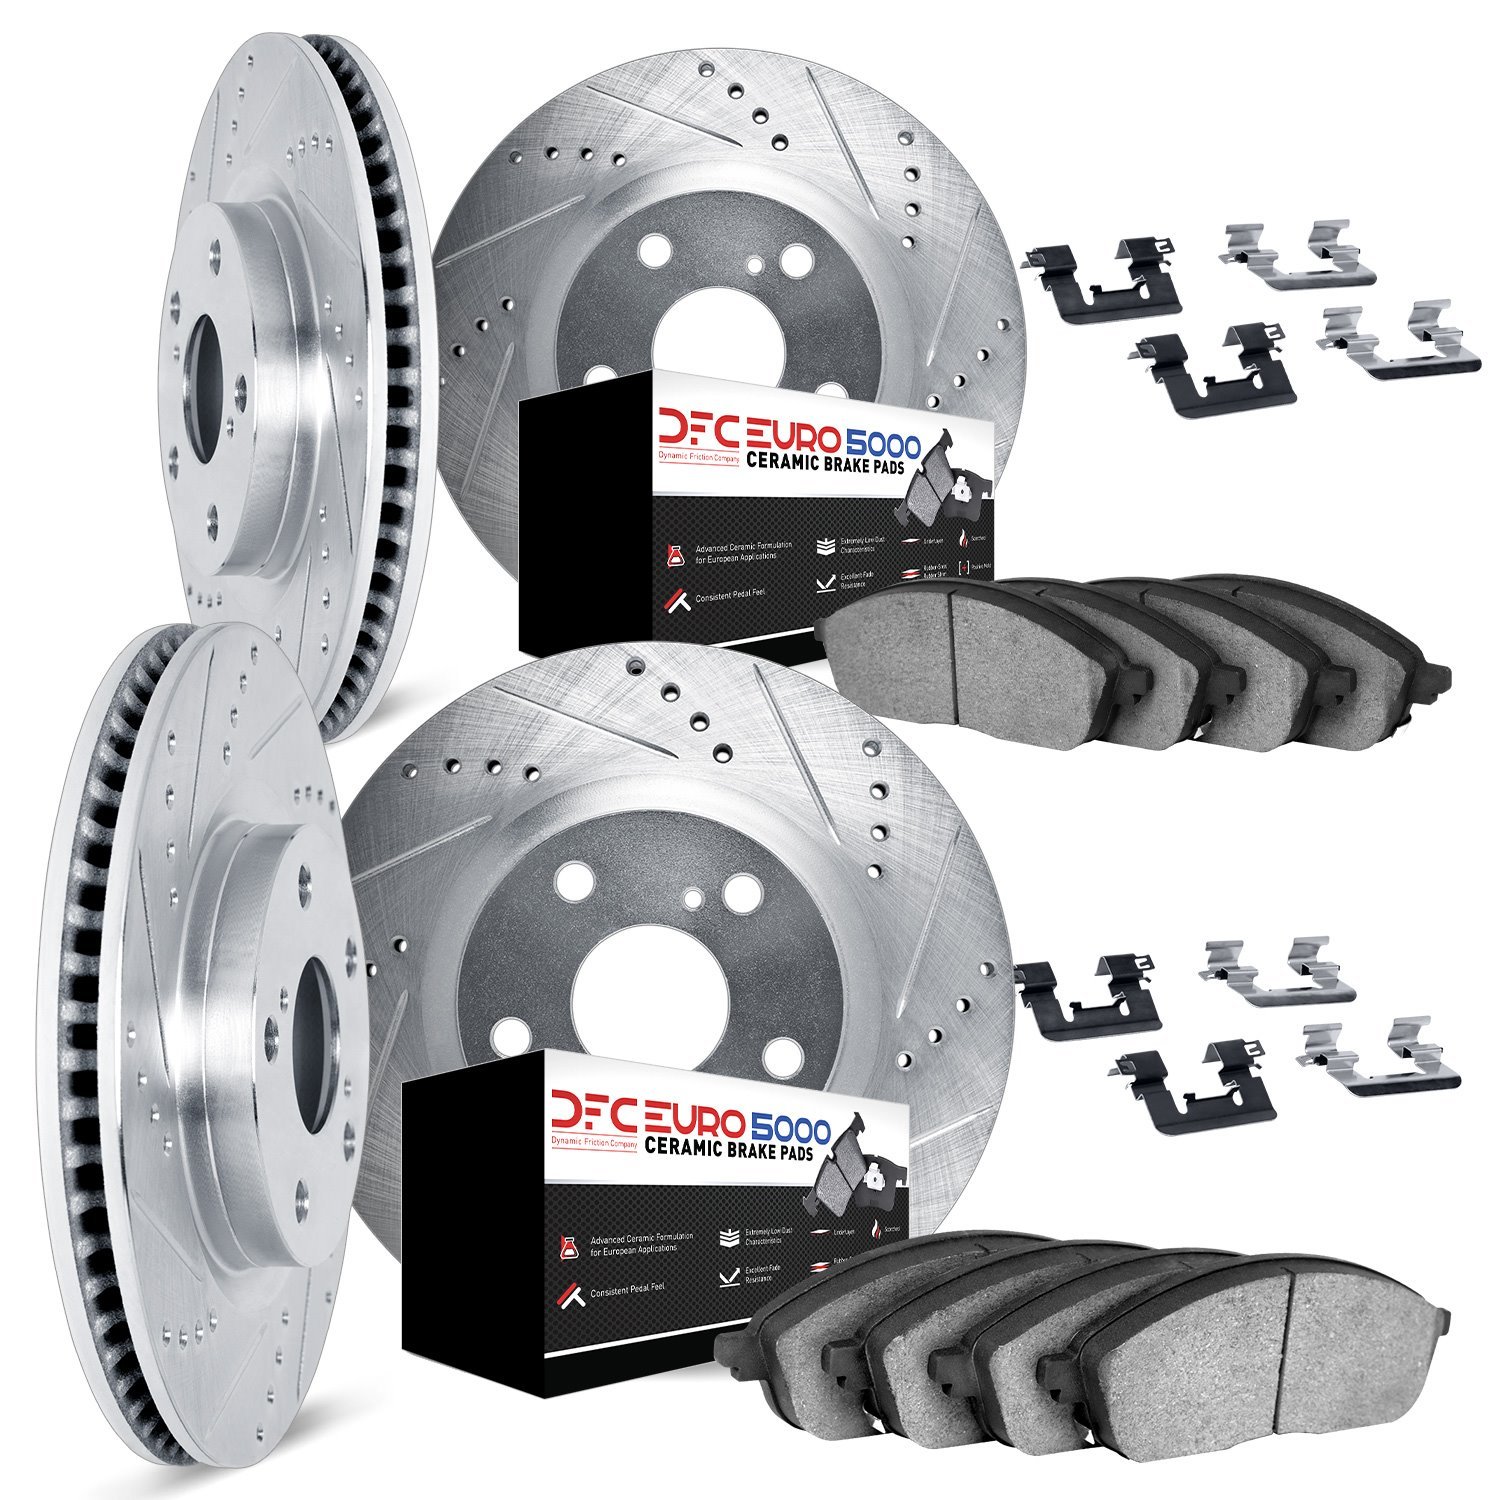 7614-31037 Drilled/Slotted Brake Rotors w/5000 Euro Ceramic Brake Pads Kit & Hardware [Silver], 2016-2018 BMW, Position: Front a